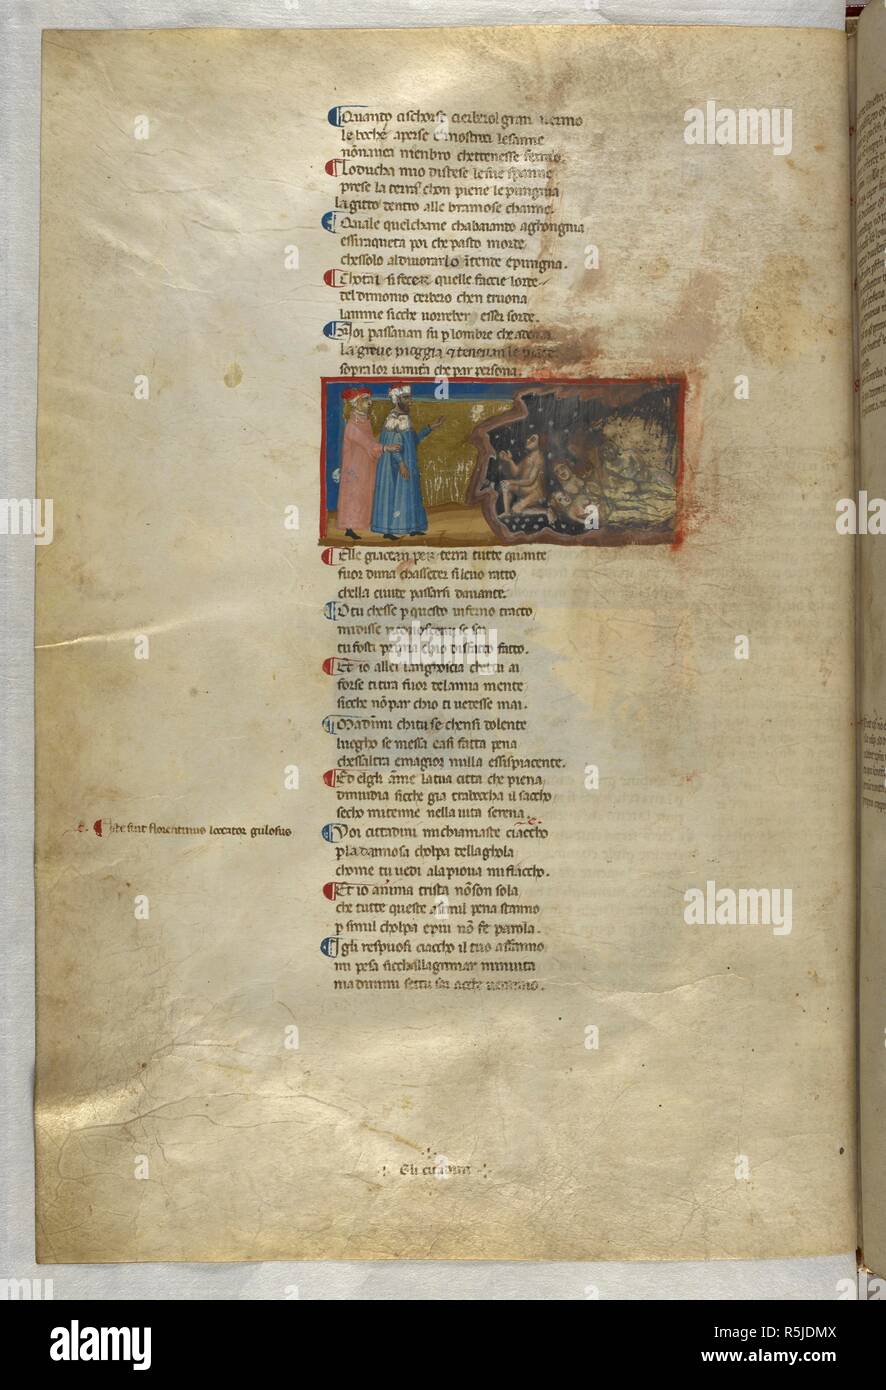 Inferno: Dante and Virgil meeting Ciacco, who prophesies in the rain. Dante Alighieri, Divina Commedia ( The Divine Comedy ), with a commentary in Latin. 1st half of the 14th century. Source: Egerton 943, f.12v. Language: Italian, Latin. Stock Photo